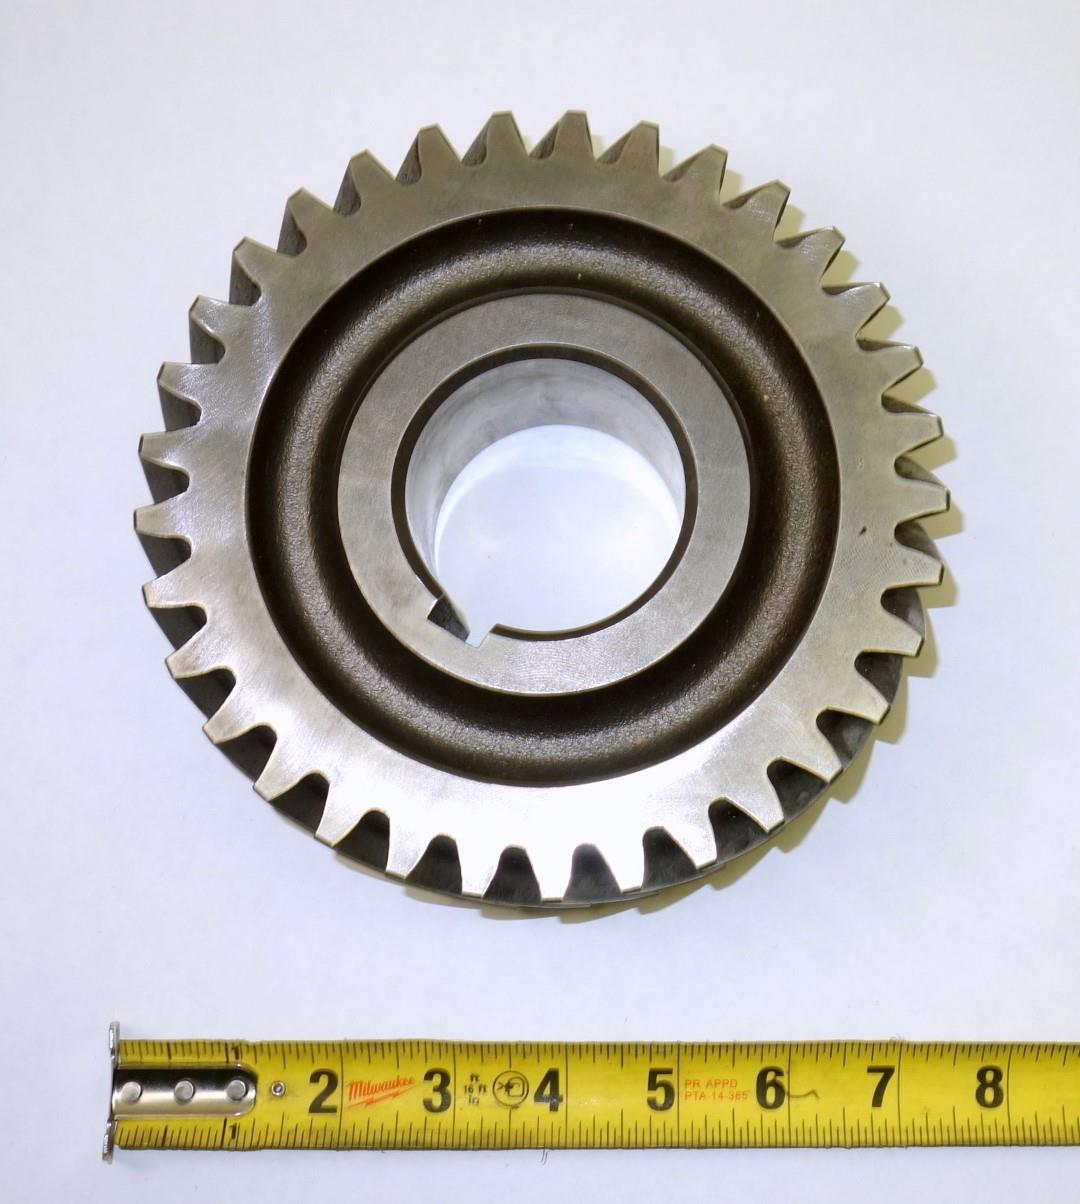 M35-658 | 3020-00-312-8350 Rear Driven Output Shaft Gear for Transfer Case for M35A2 Series with Multi Fuel Engine NOS (3).JPG